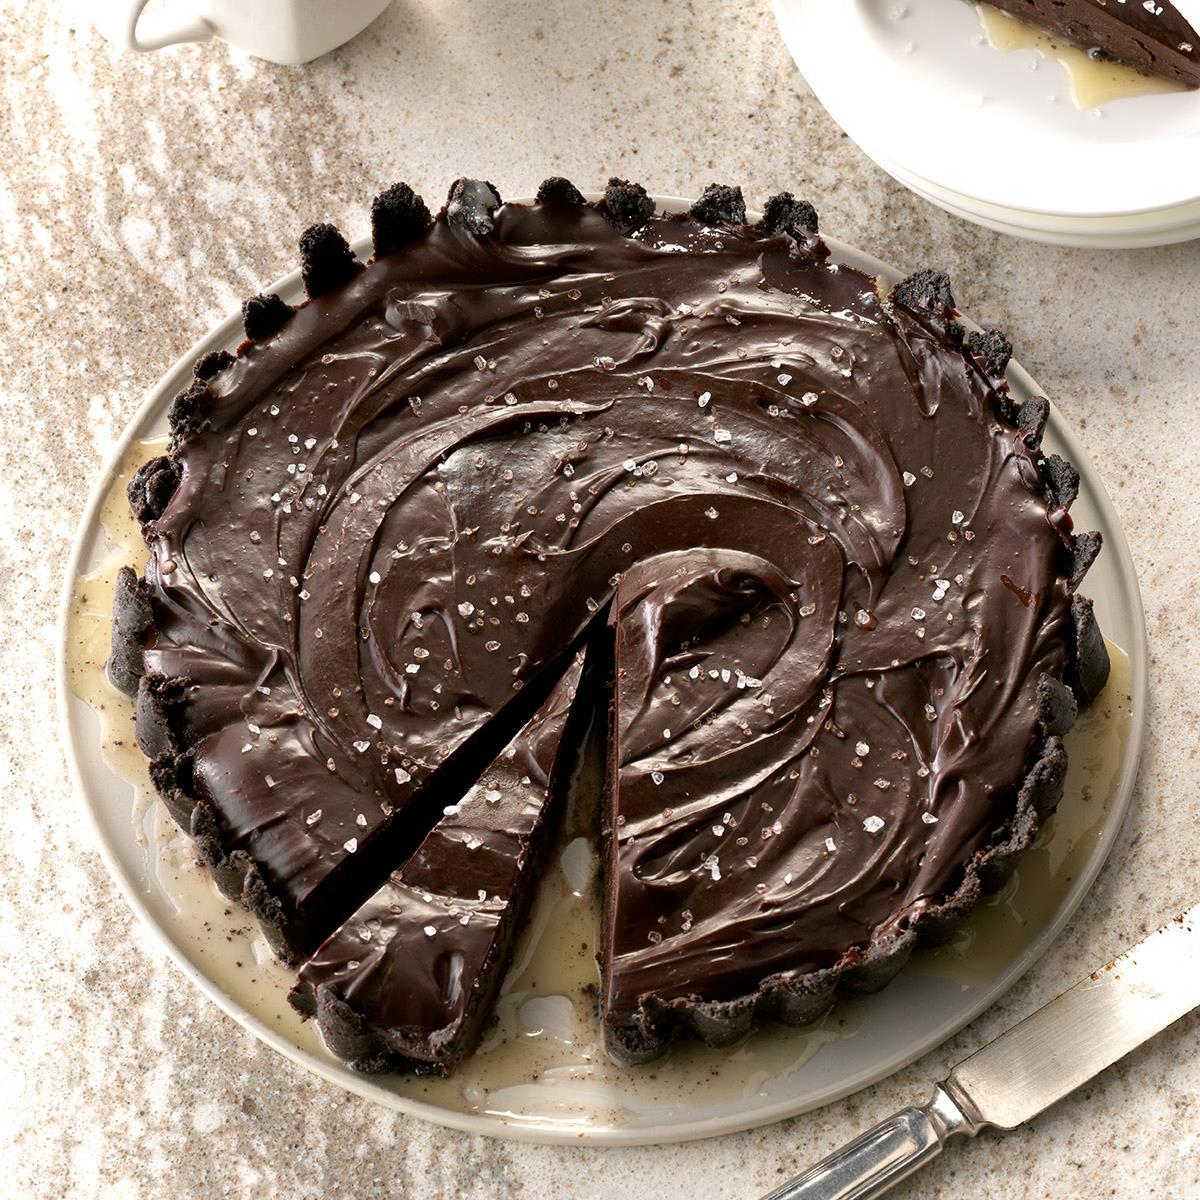 40 Dark Chocolate Desserts You’ll Want to Dig Into